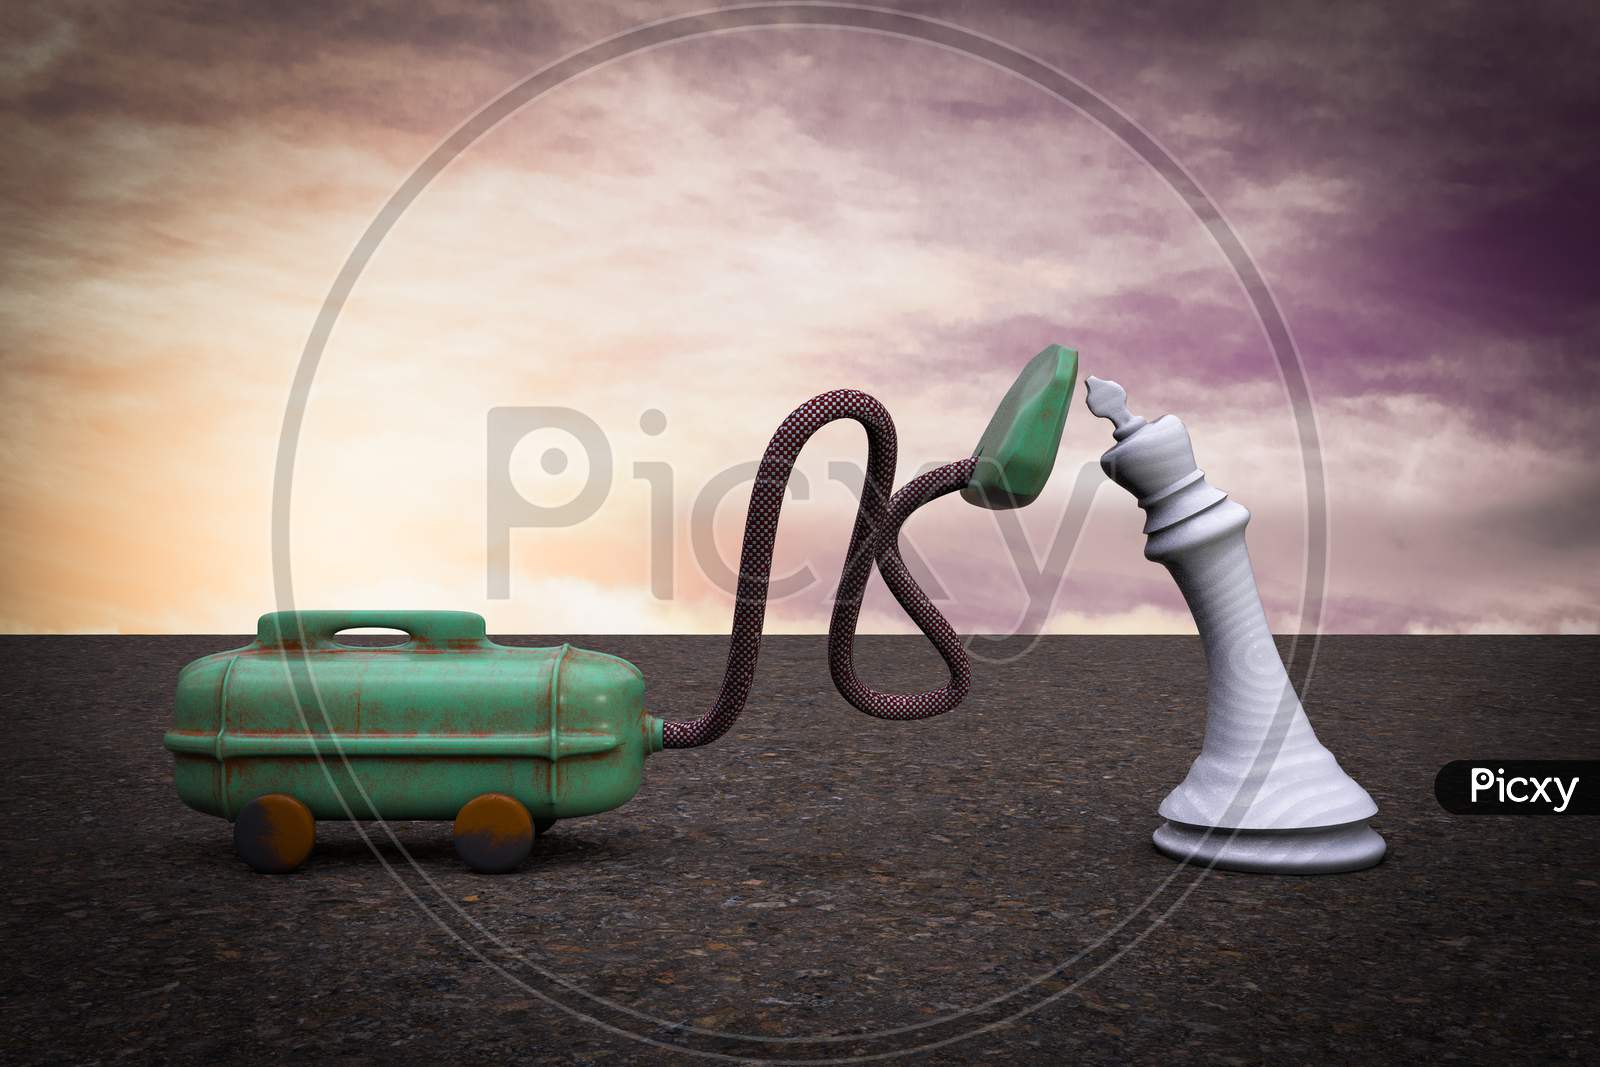 Vacuum Cleaner Sucking Chess King At Sunset Magenta Day Demonstrating Losing Leadership Concept. 3D Illustration